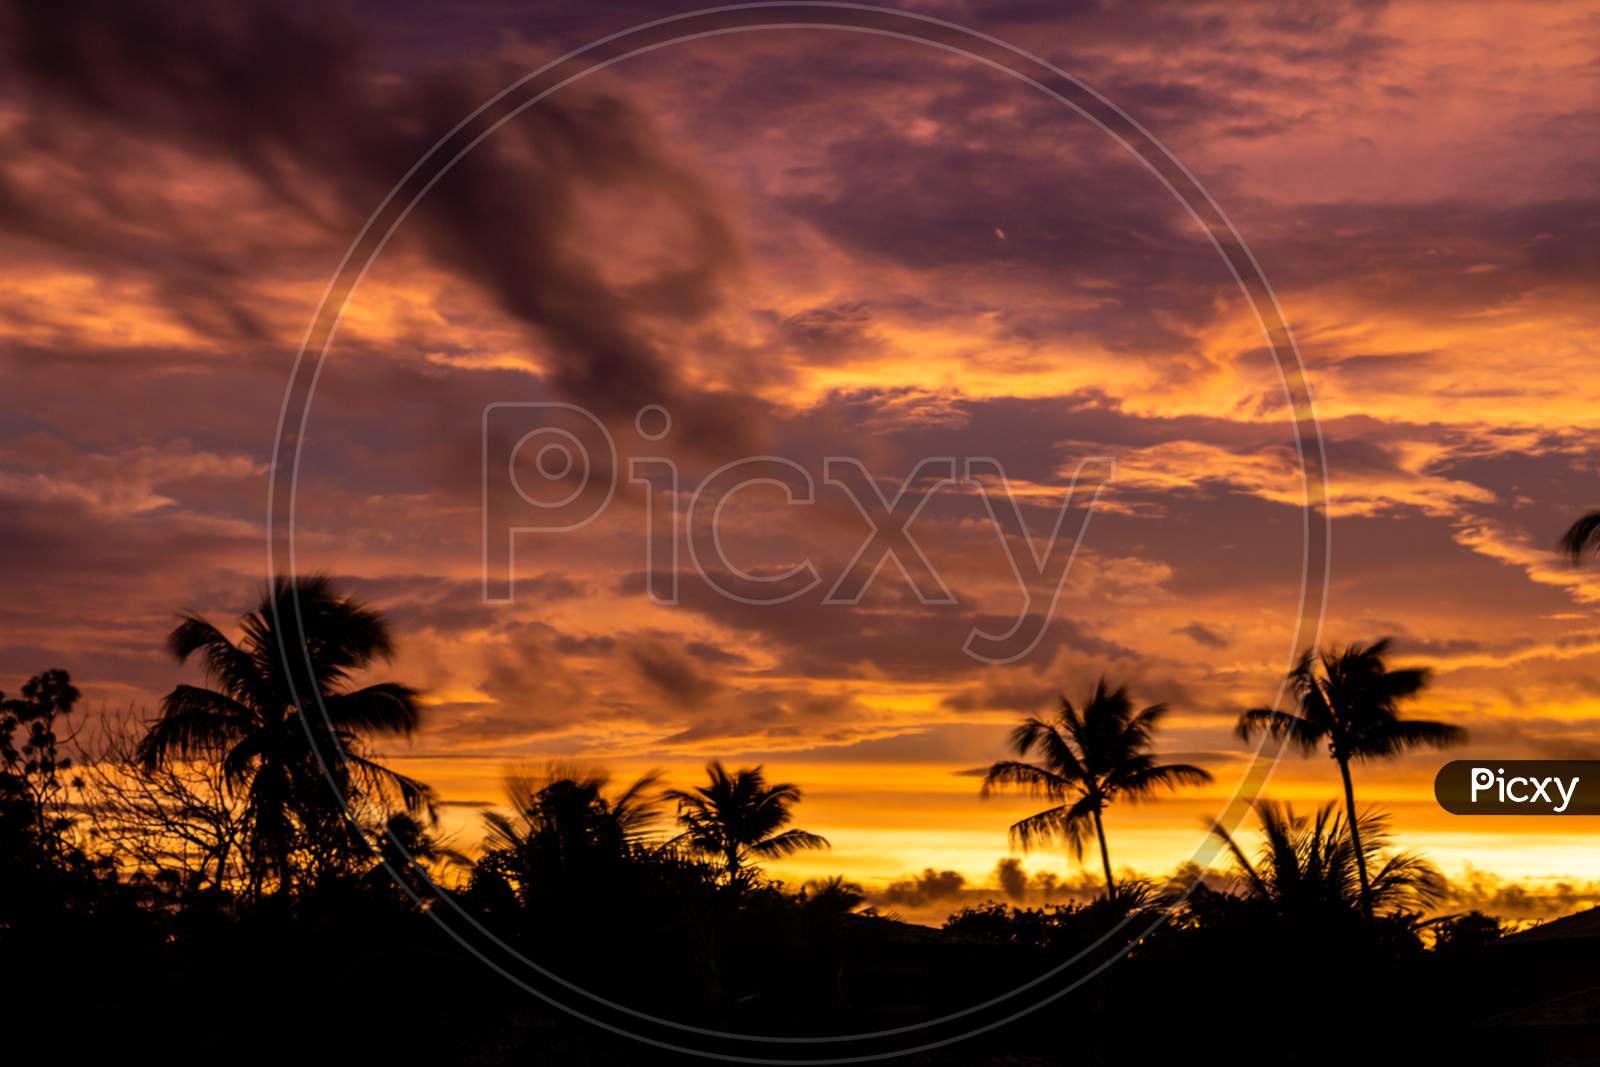 Sunset Between Palm Trees. Golden Hour Fall Of The Sun With Clouds Painted Warm Colors.